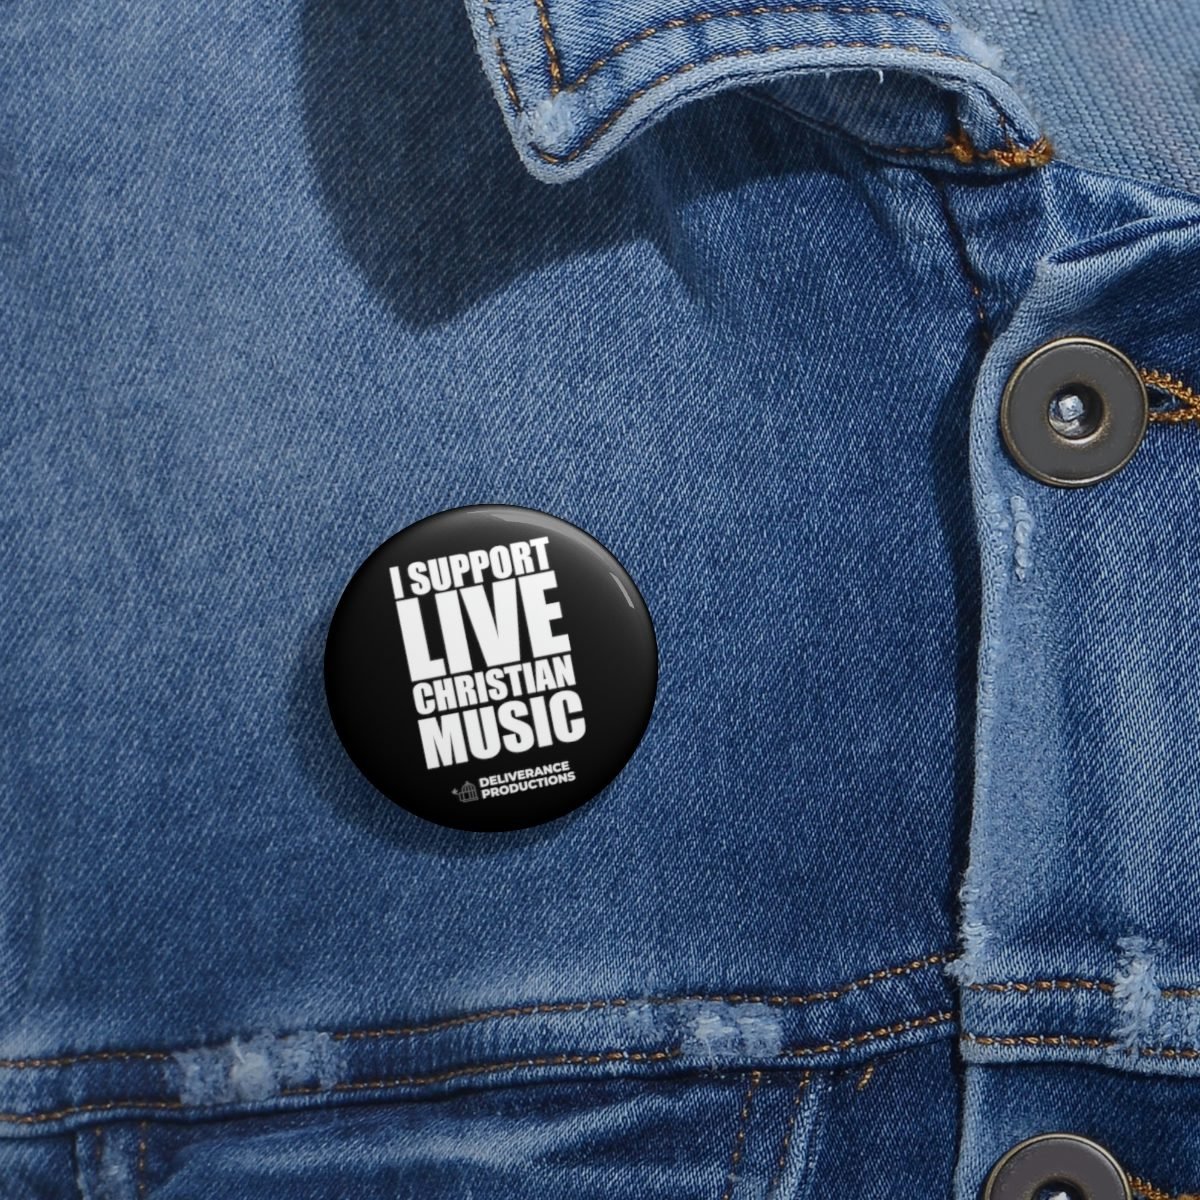 Deliverance Productions – I Support Live Christian Music Pin Buttons